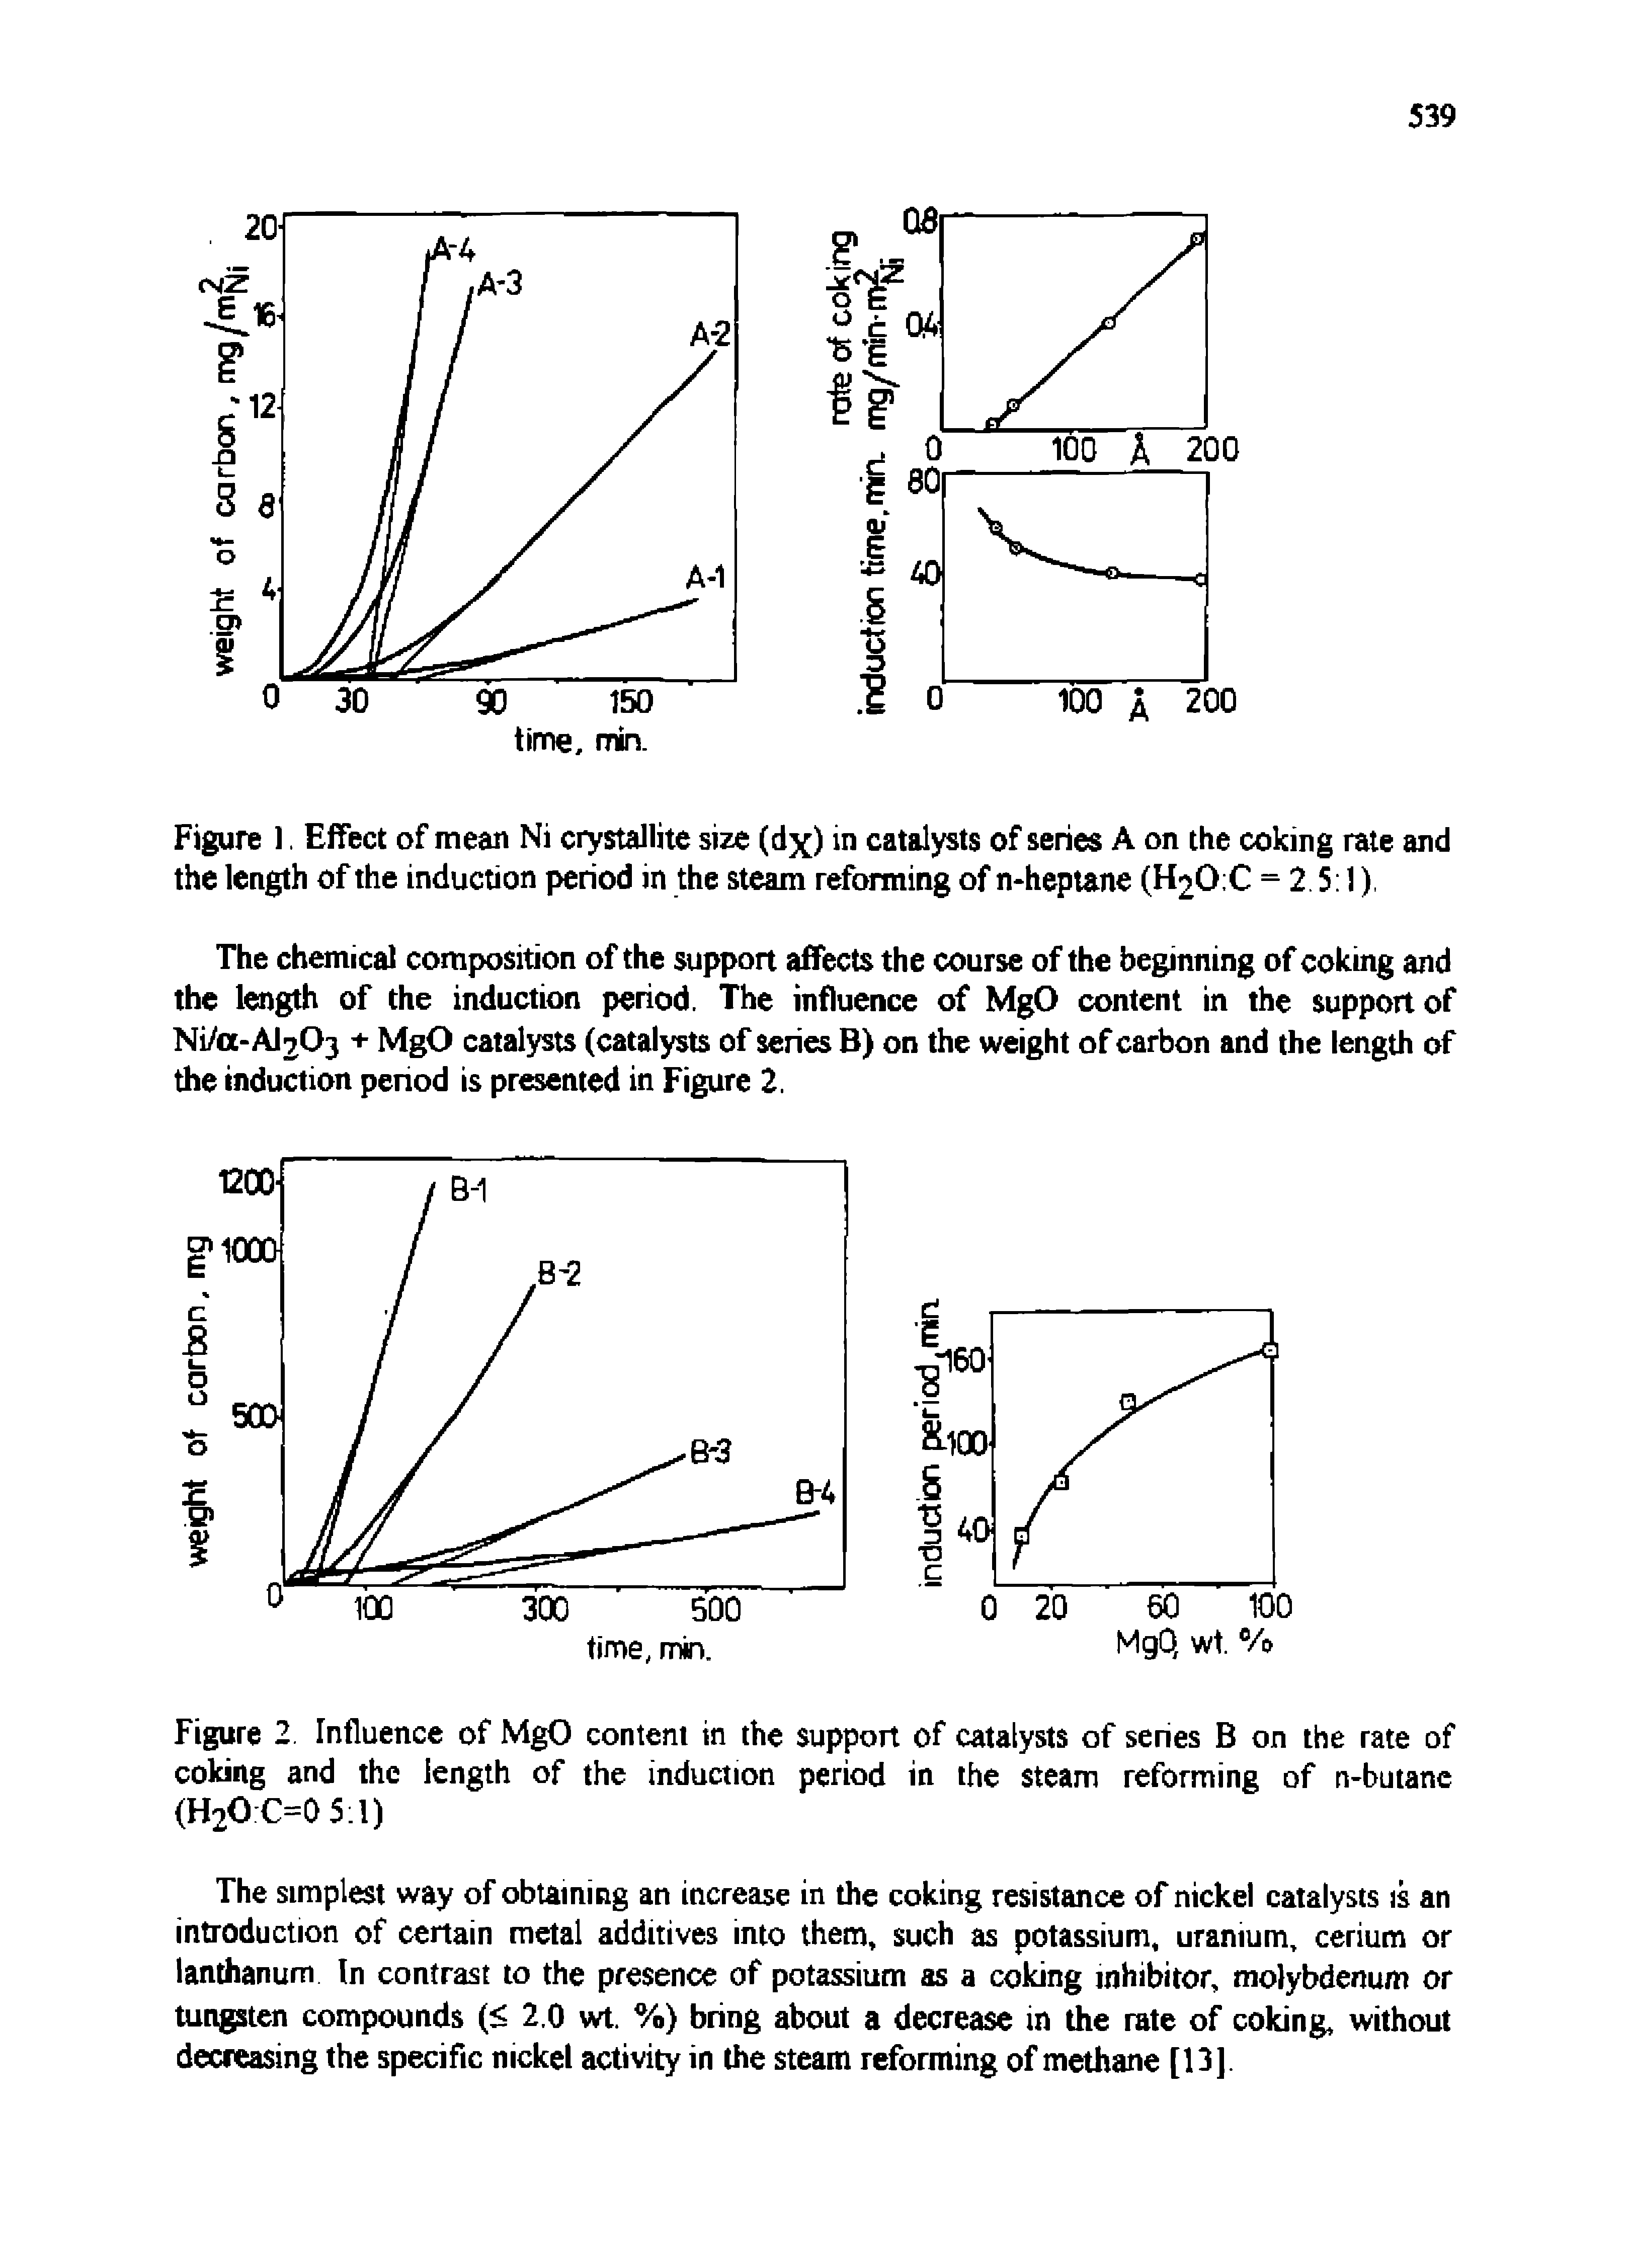 Figure 1, Effect of mean Ni crystallite size (dx) in catalysts of series A on the coking rate and the length of the induction period in the steam reforming of n-heptane (H20 C = 25 1)...